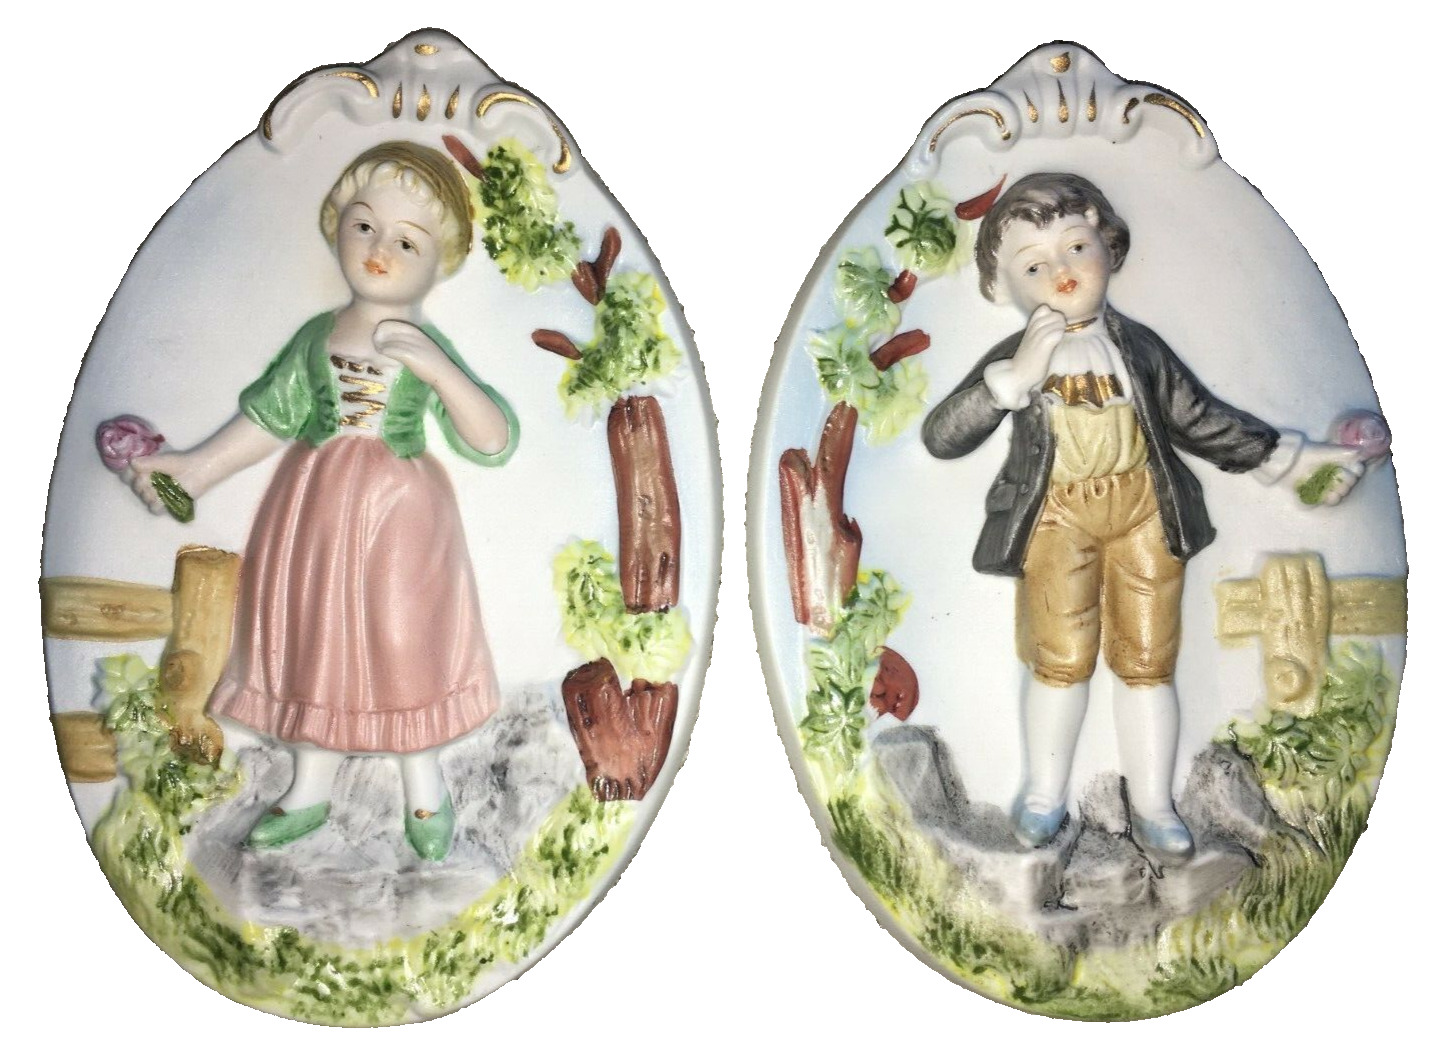 Vintage Ardco Boy and Girl Bisque Ceramic Wall Plaque MINT CONDITION